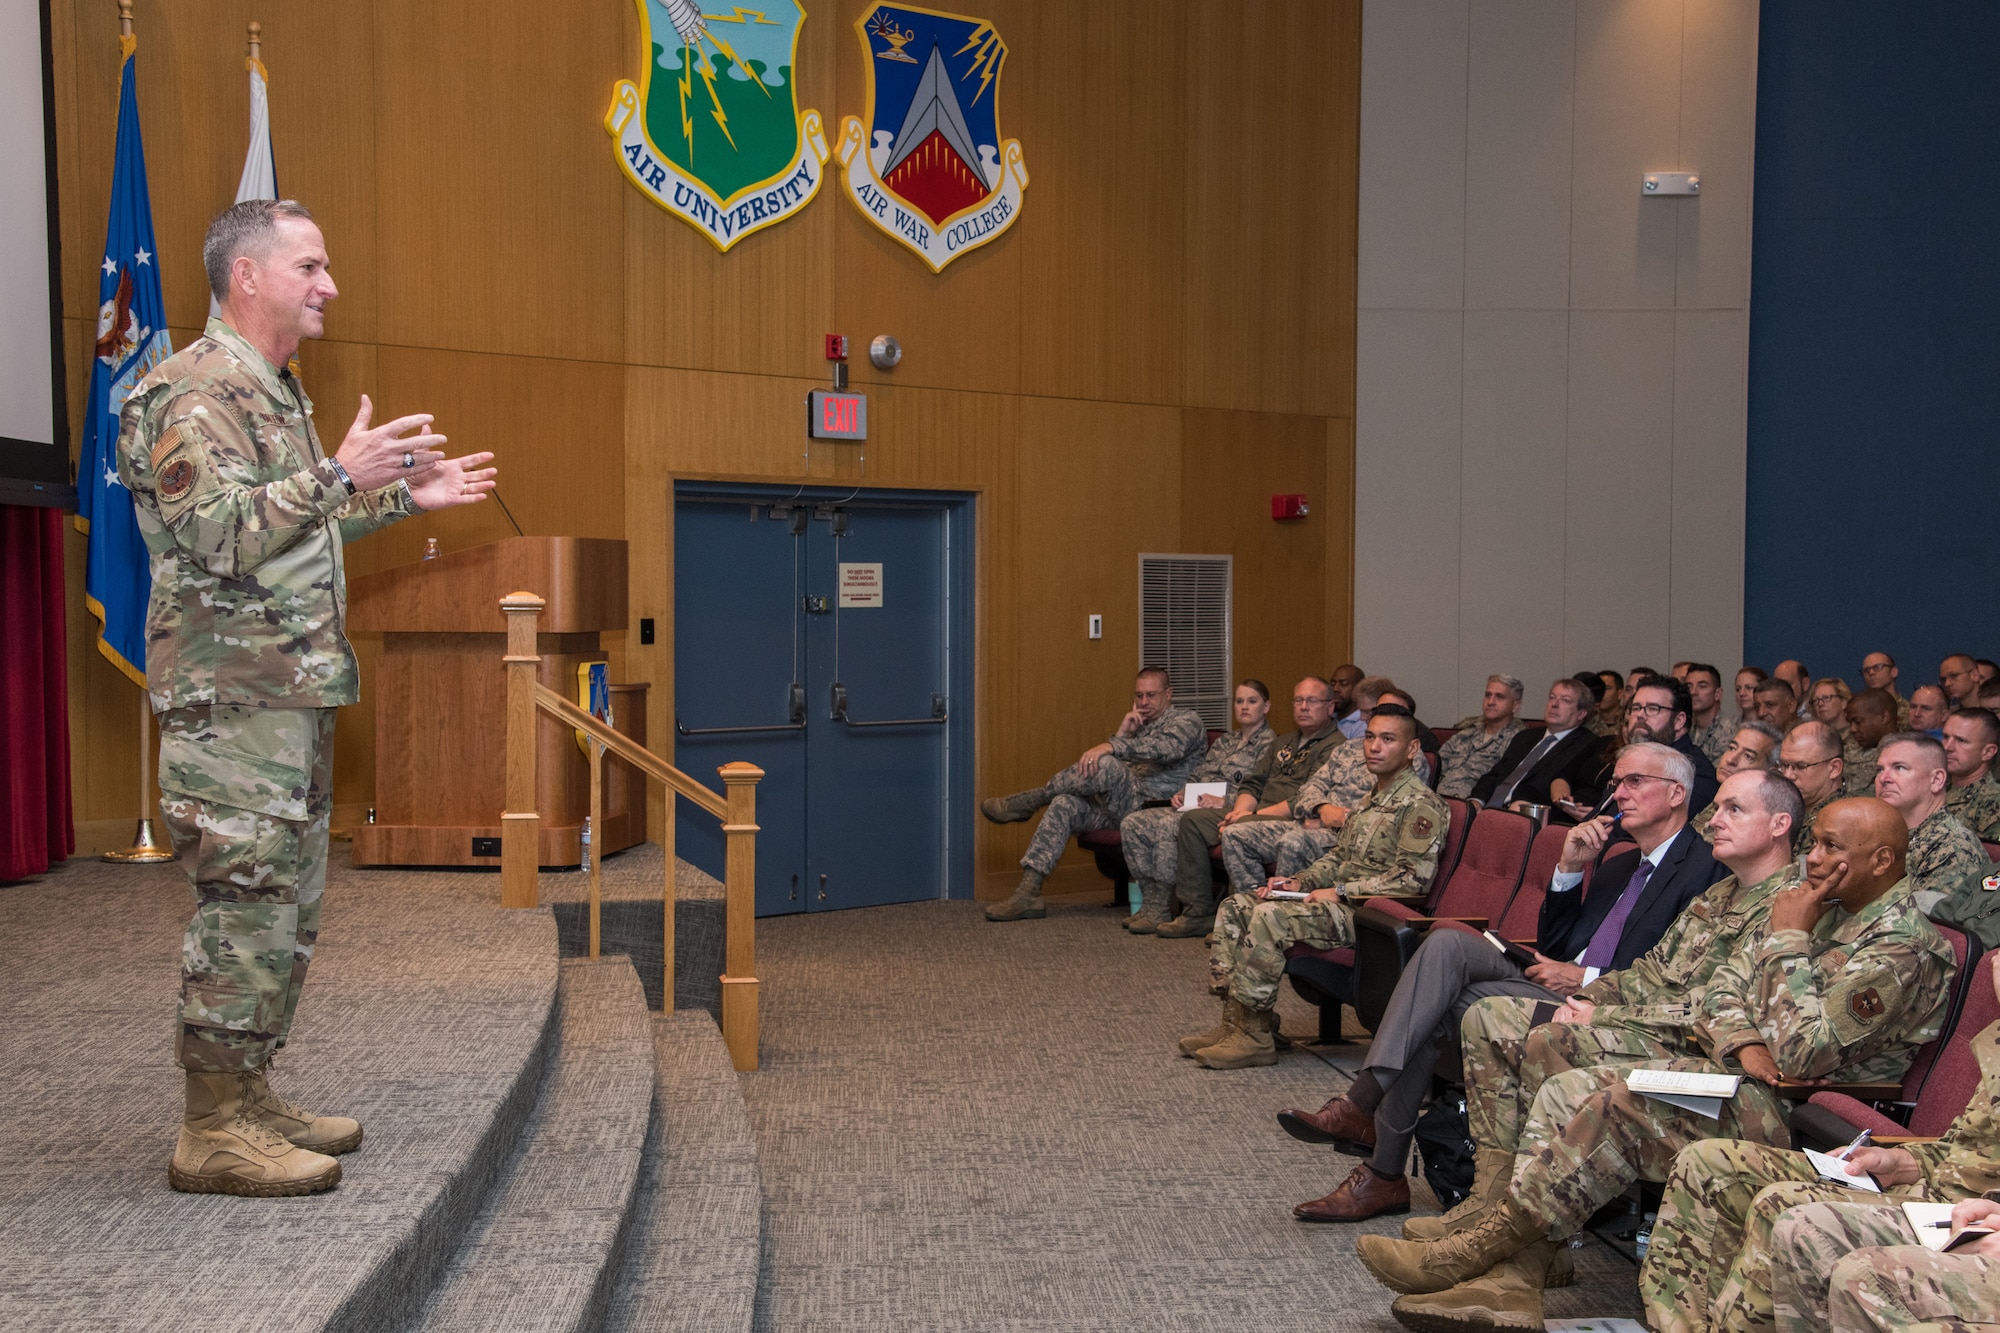 Air Force Chief of Staff Gen. David L. Goldfein speaks to the incoming Air War College class during his visit to Air University Aug. 7, 2019, at Maxwell Air Force Base, Alabama. Goldfein provided guidance for what he wants the students to accomplish and focus on during their time at the AWC. (U.S. Air Force photo by William Birchfield)